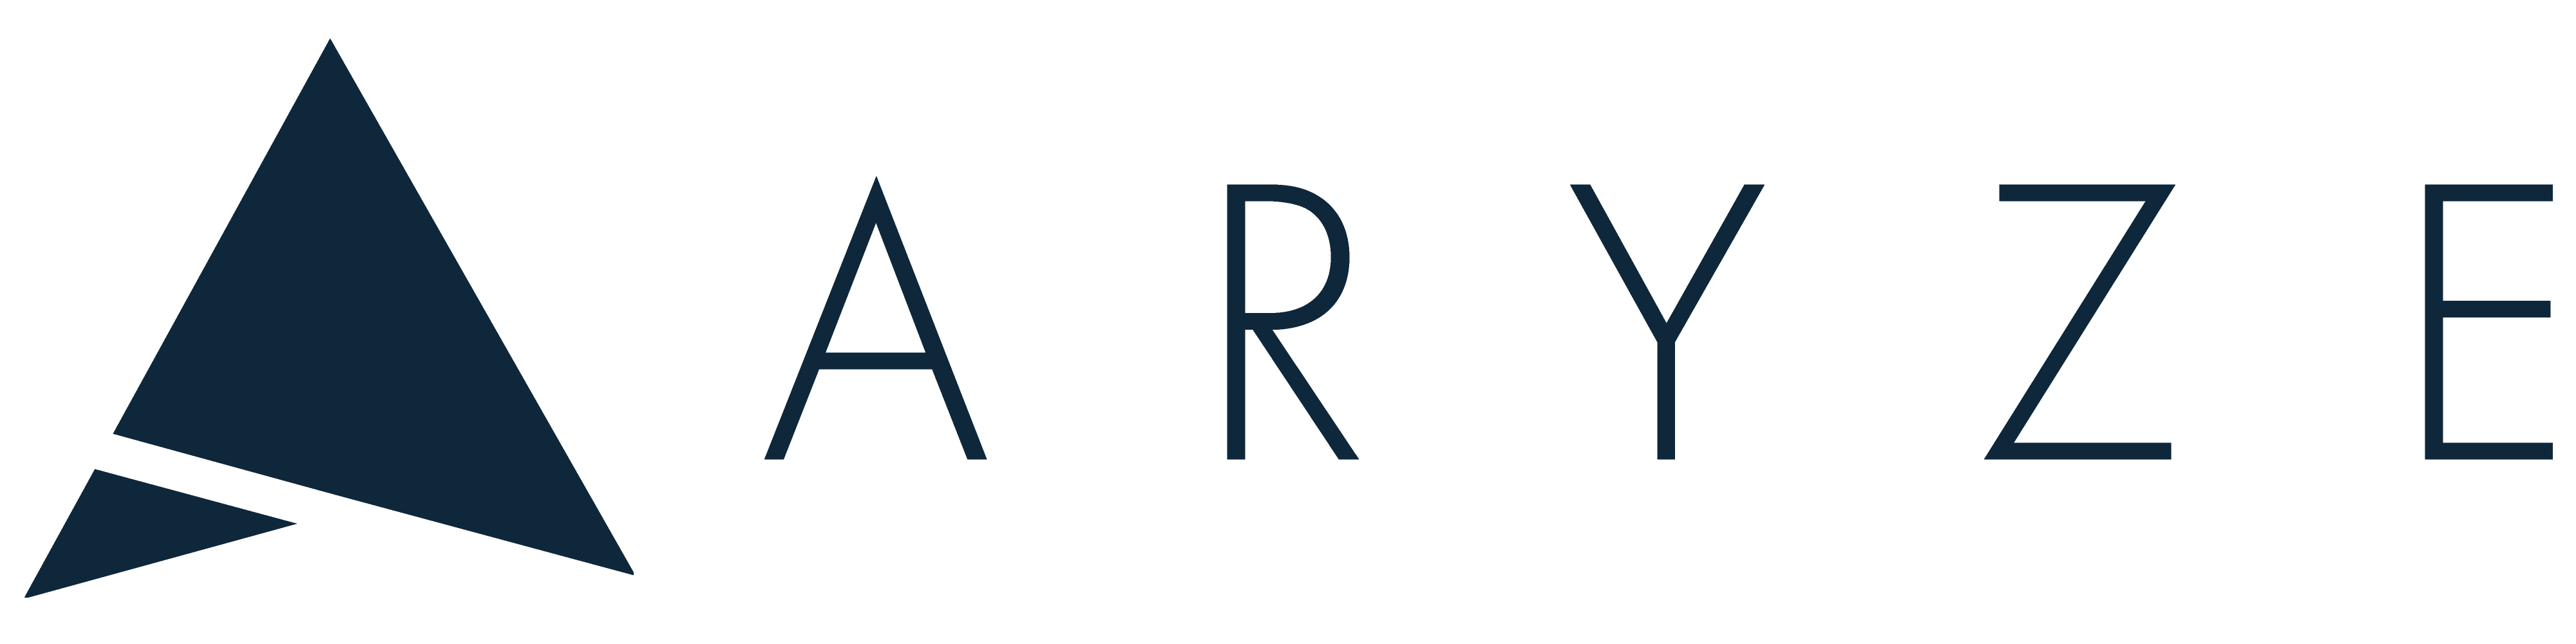 ARYZE Introduces Revolutionary Stablecoin Series to Rebuild Trust in Digital Assets